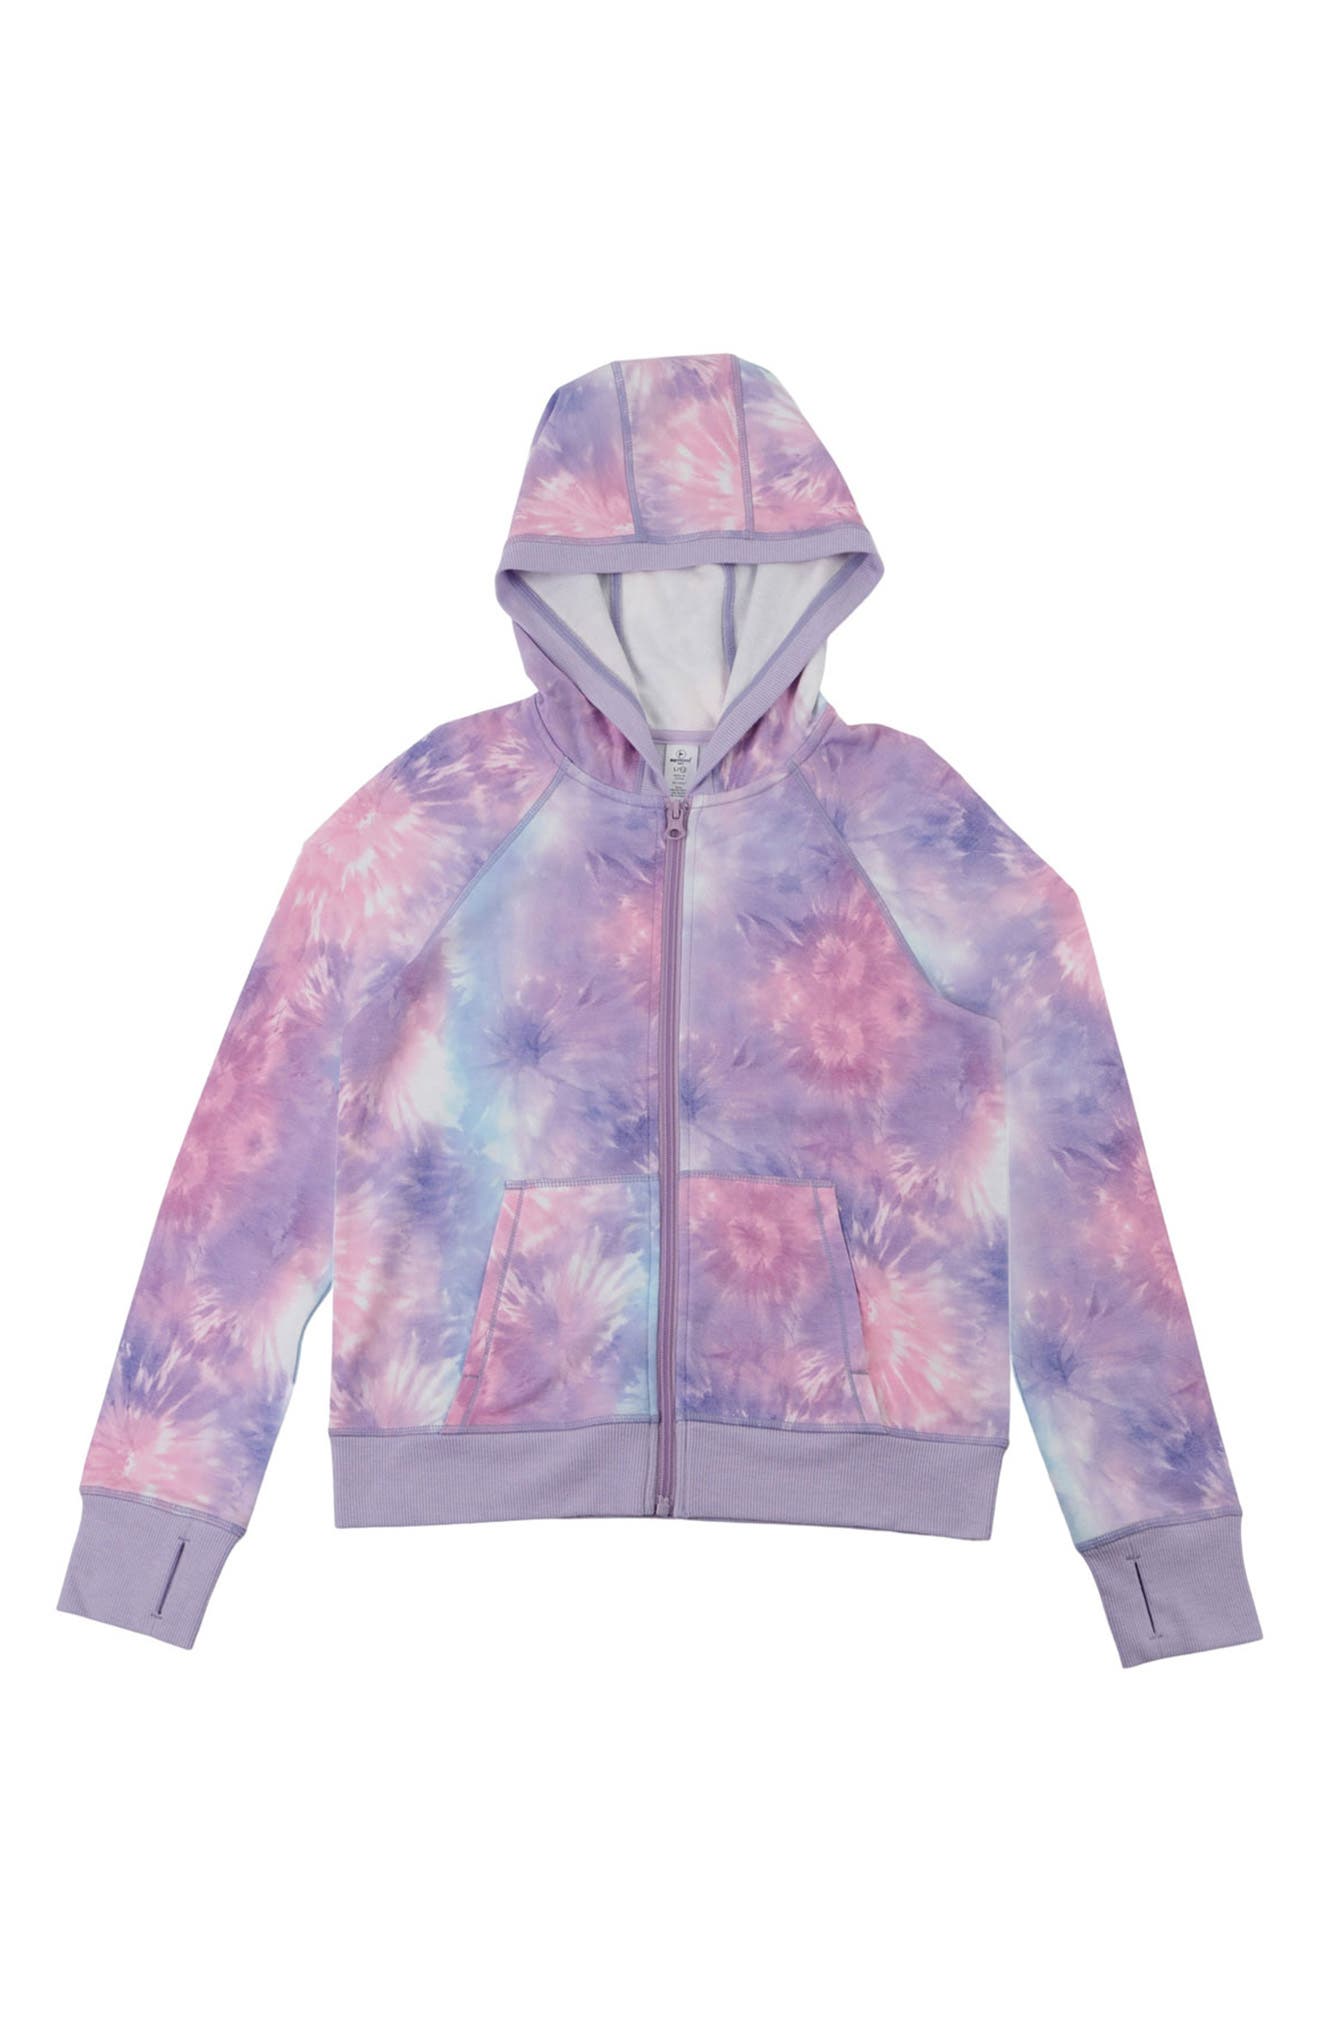 NWT 90 Degree By Reflex Youth Girls Brushed Inside Hoodie Jacket Pink Size 12